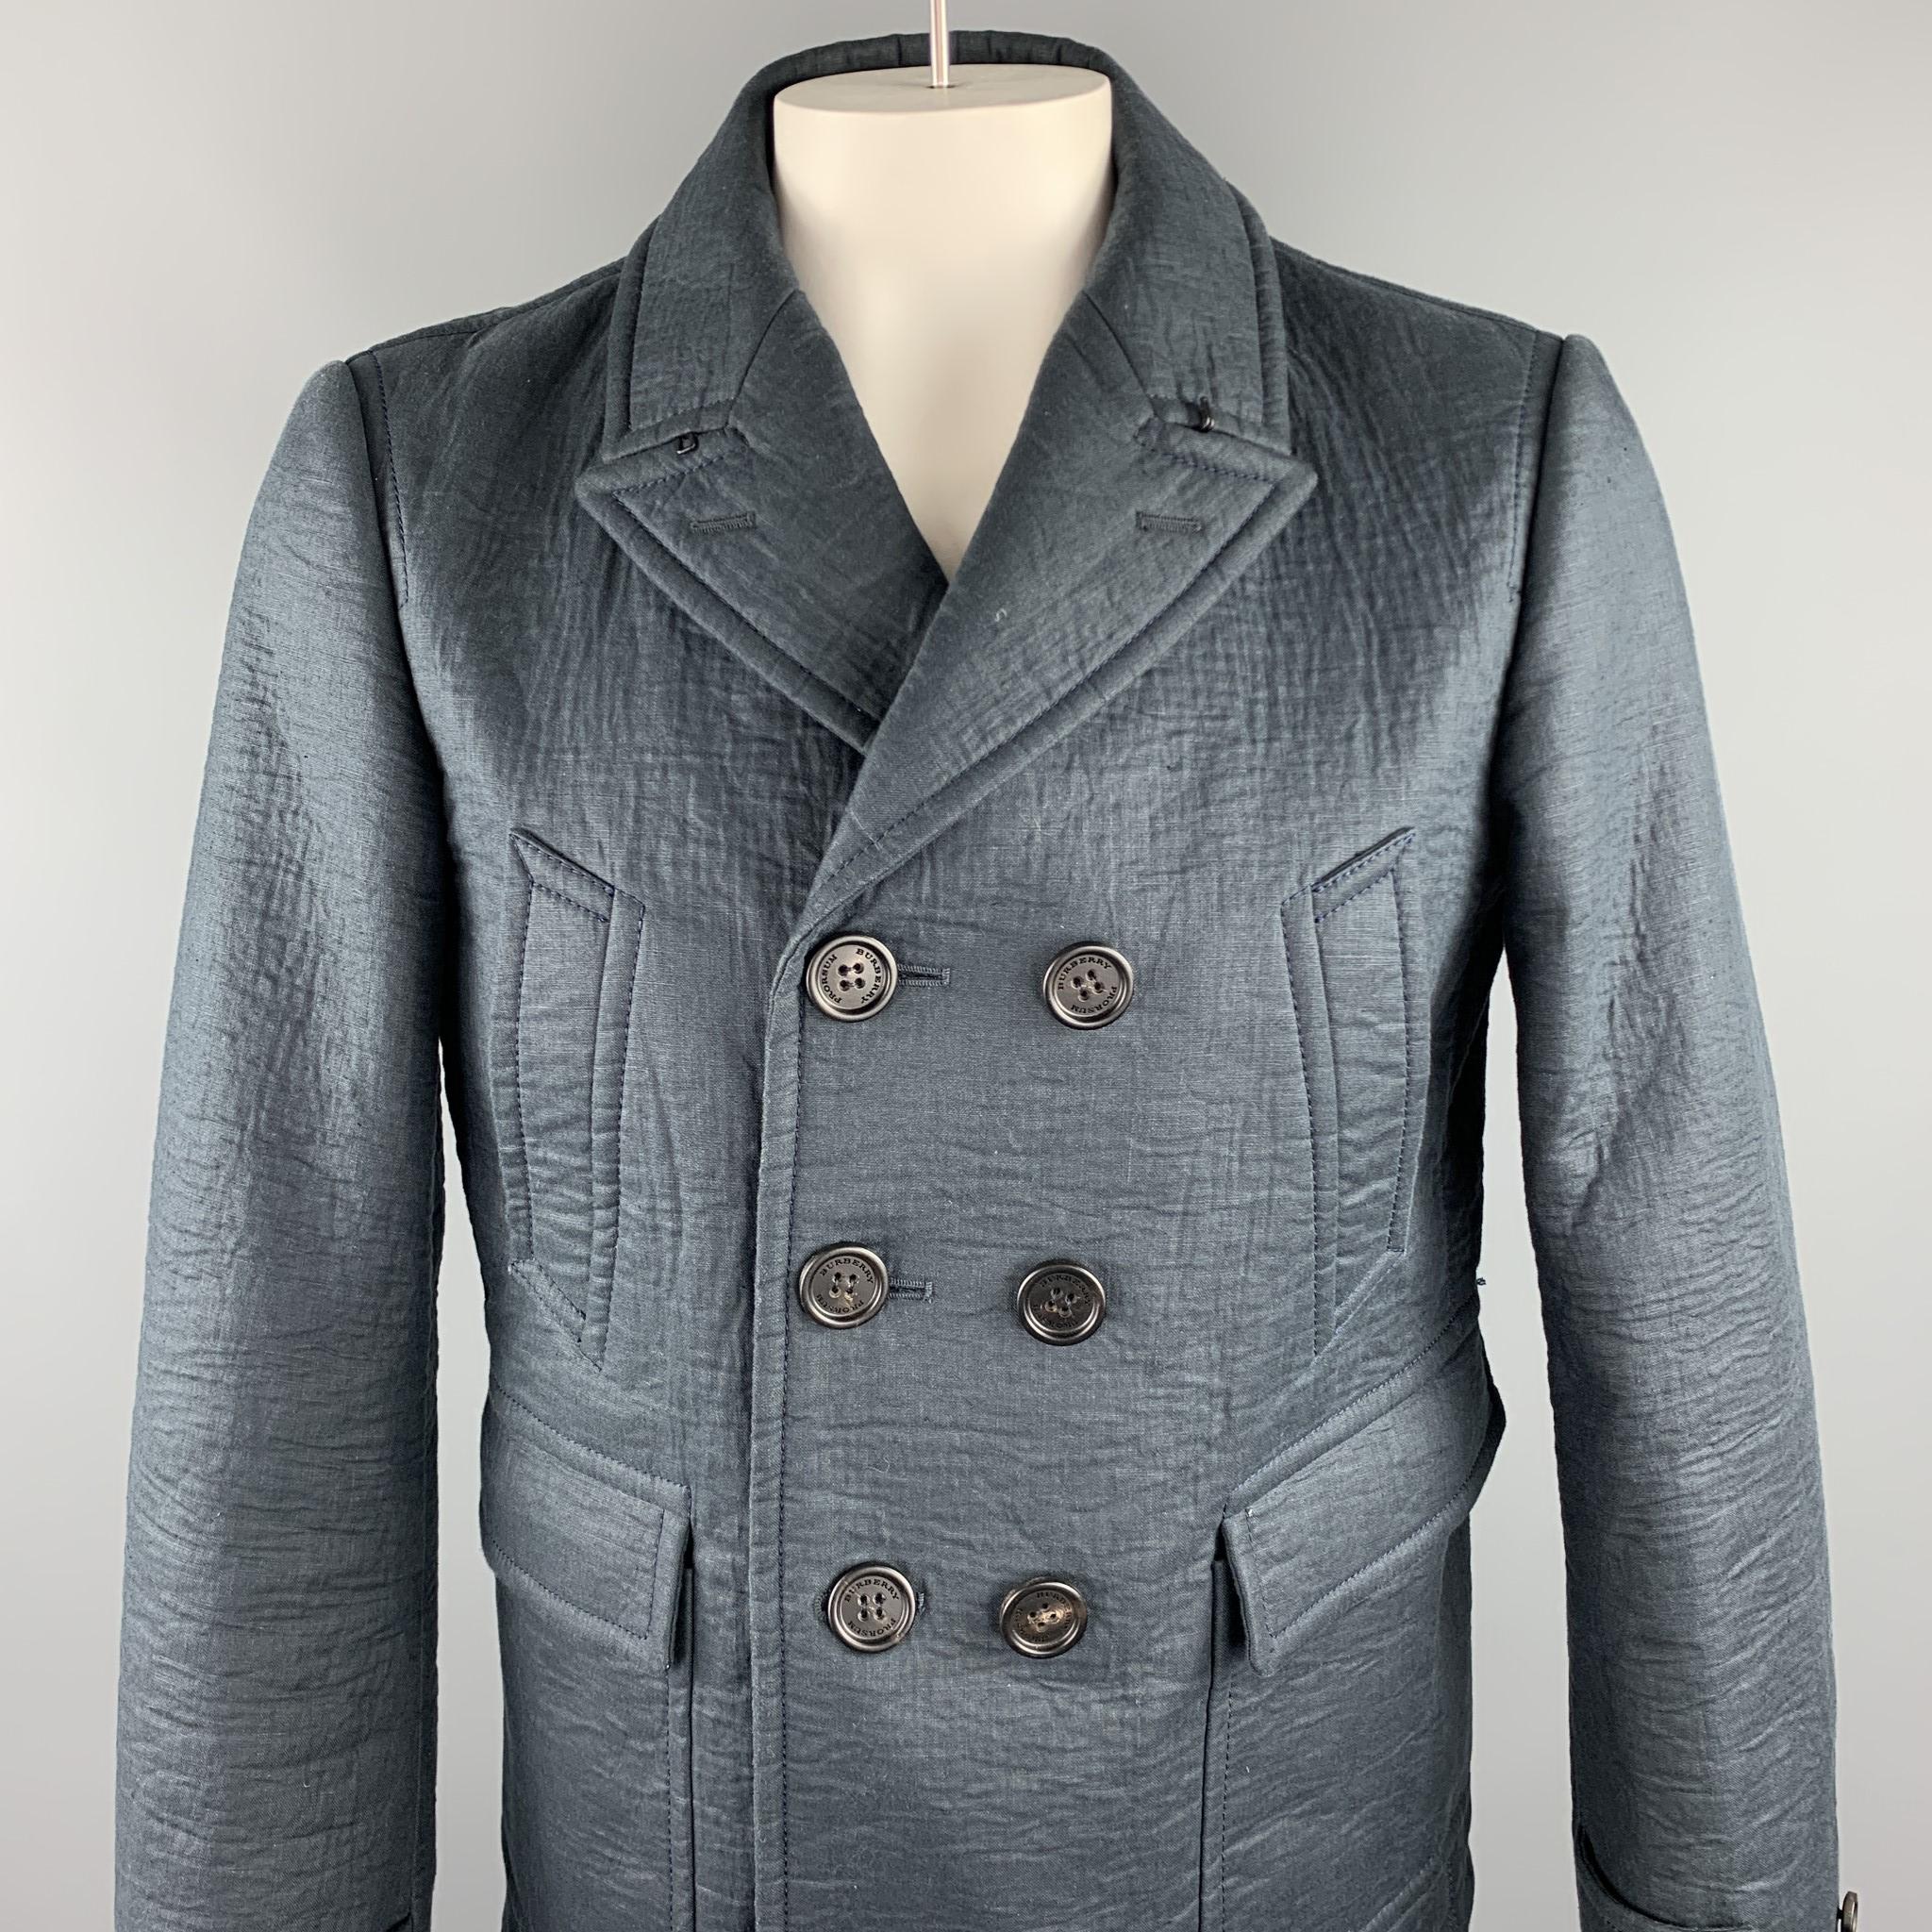 BURBERRY PRORSUM pea coat comes in a navy textured linen / wool with a full black monogram liner featuring a peak lapel, patch pockets, hook & eye, and a double breasted closure. Made in Italy.

Excellent Pre-Owned Condition.
Marked: IT